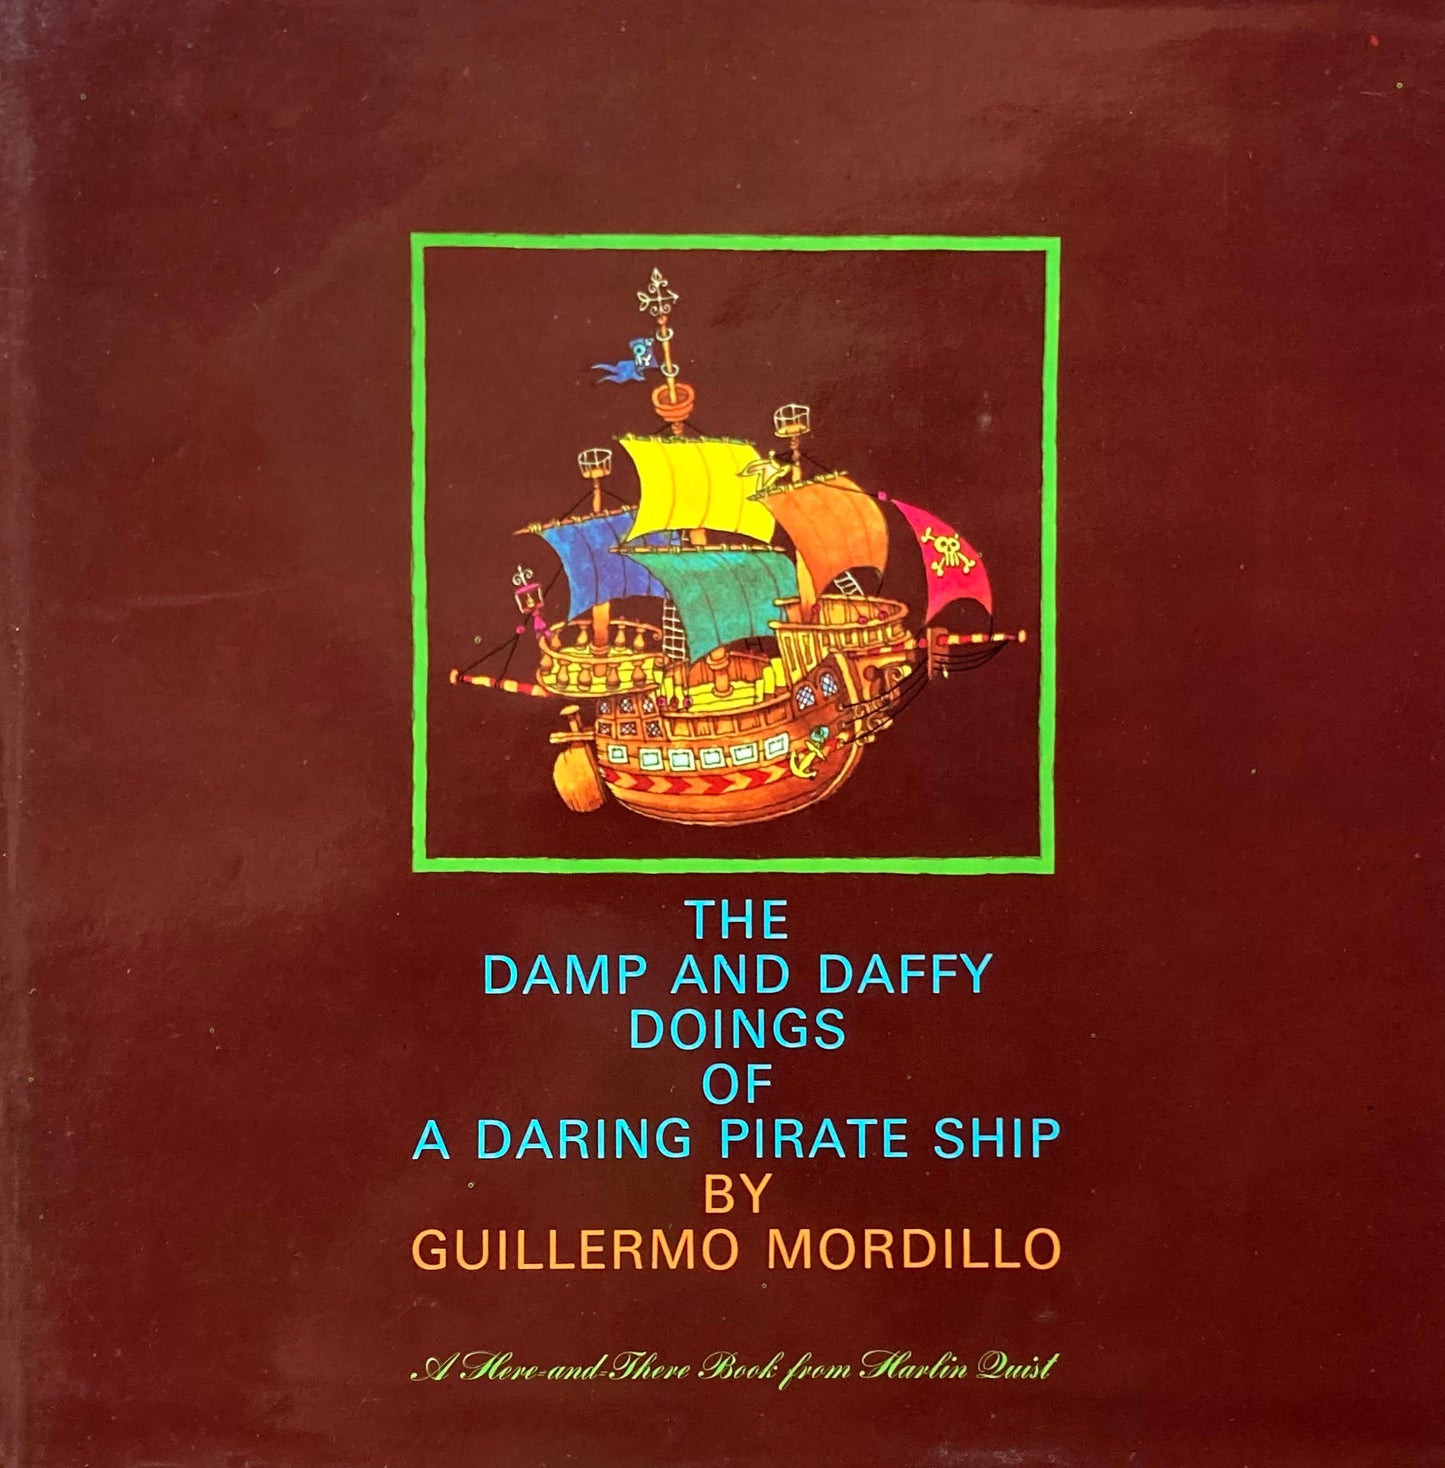 The Damp and Daffy Doing of a Daring Pirate Ship ギレルモ・モルディロ　Guillermo Mordillo